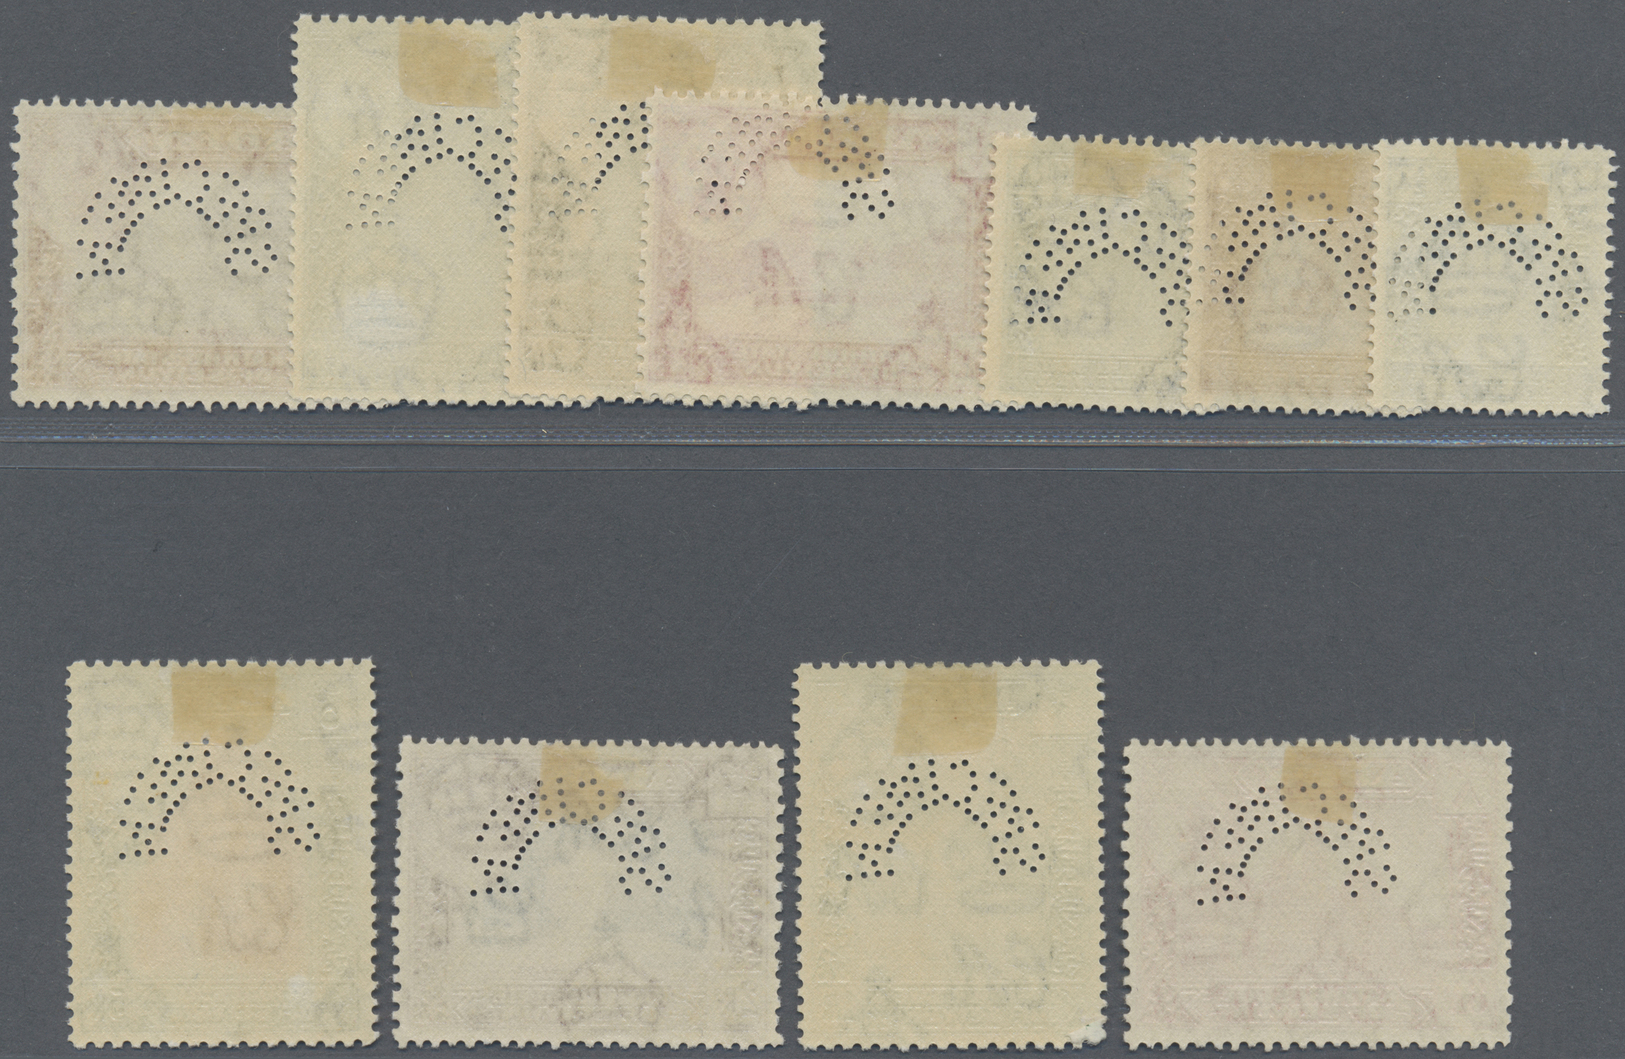 * Aden - Kathiri State Of Seiyun: 1942, Definitives Sultan Of Seyun And Country Impressions Complete Set Perforated SPEC - Yemen